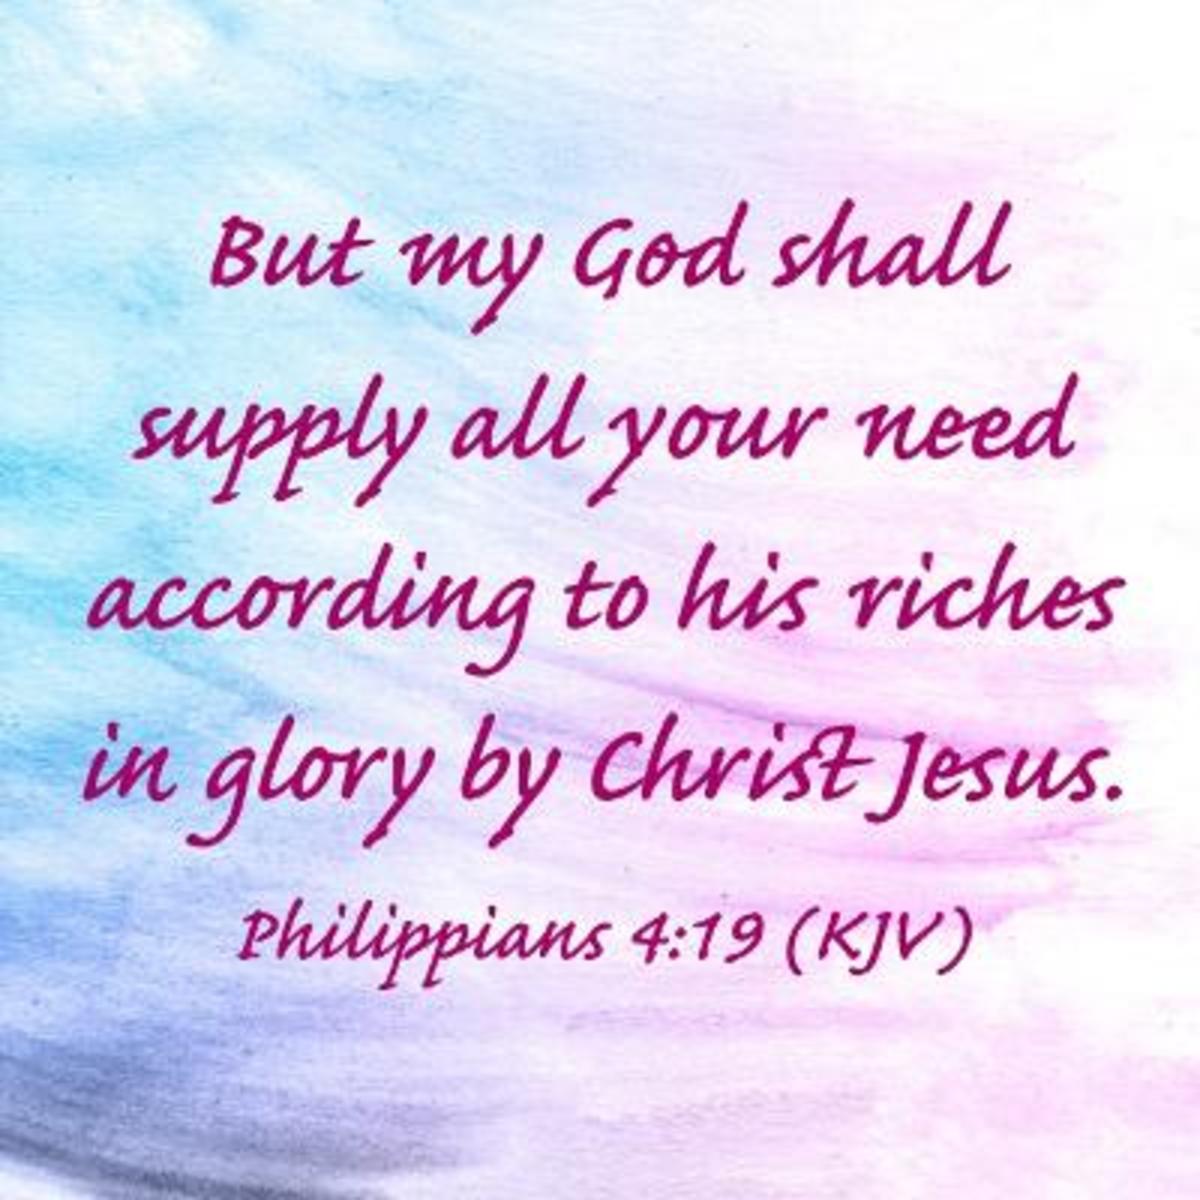 philippians-419-is-misquoted-and-misinterpreted-my-god-shall-supply-all-my-needs